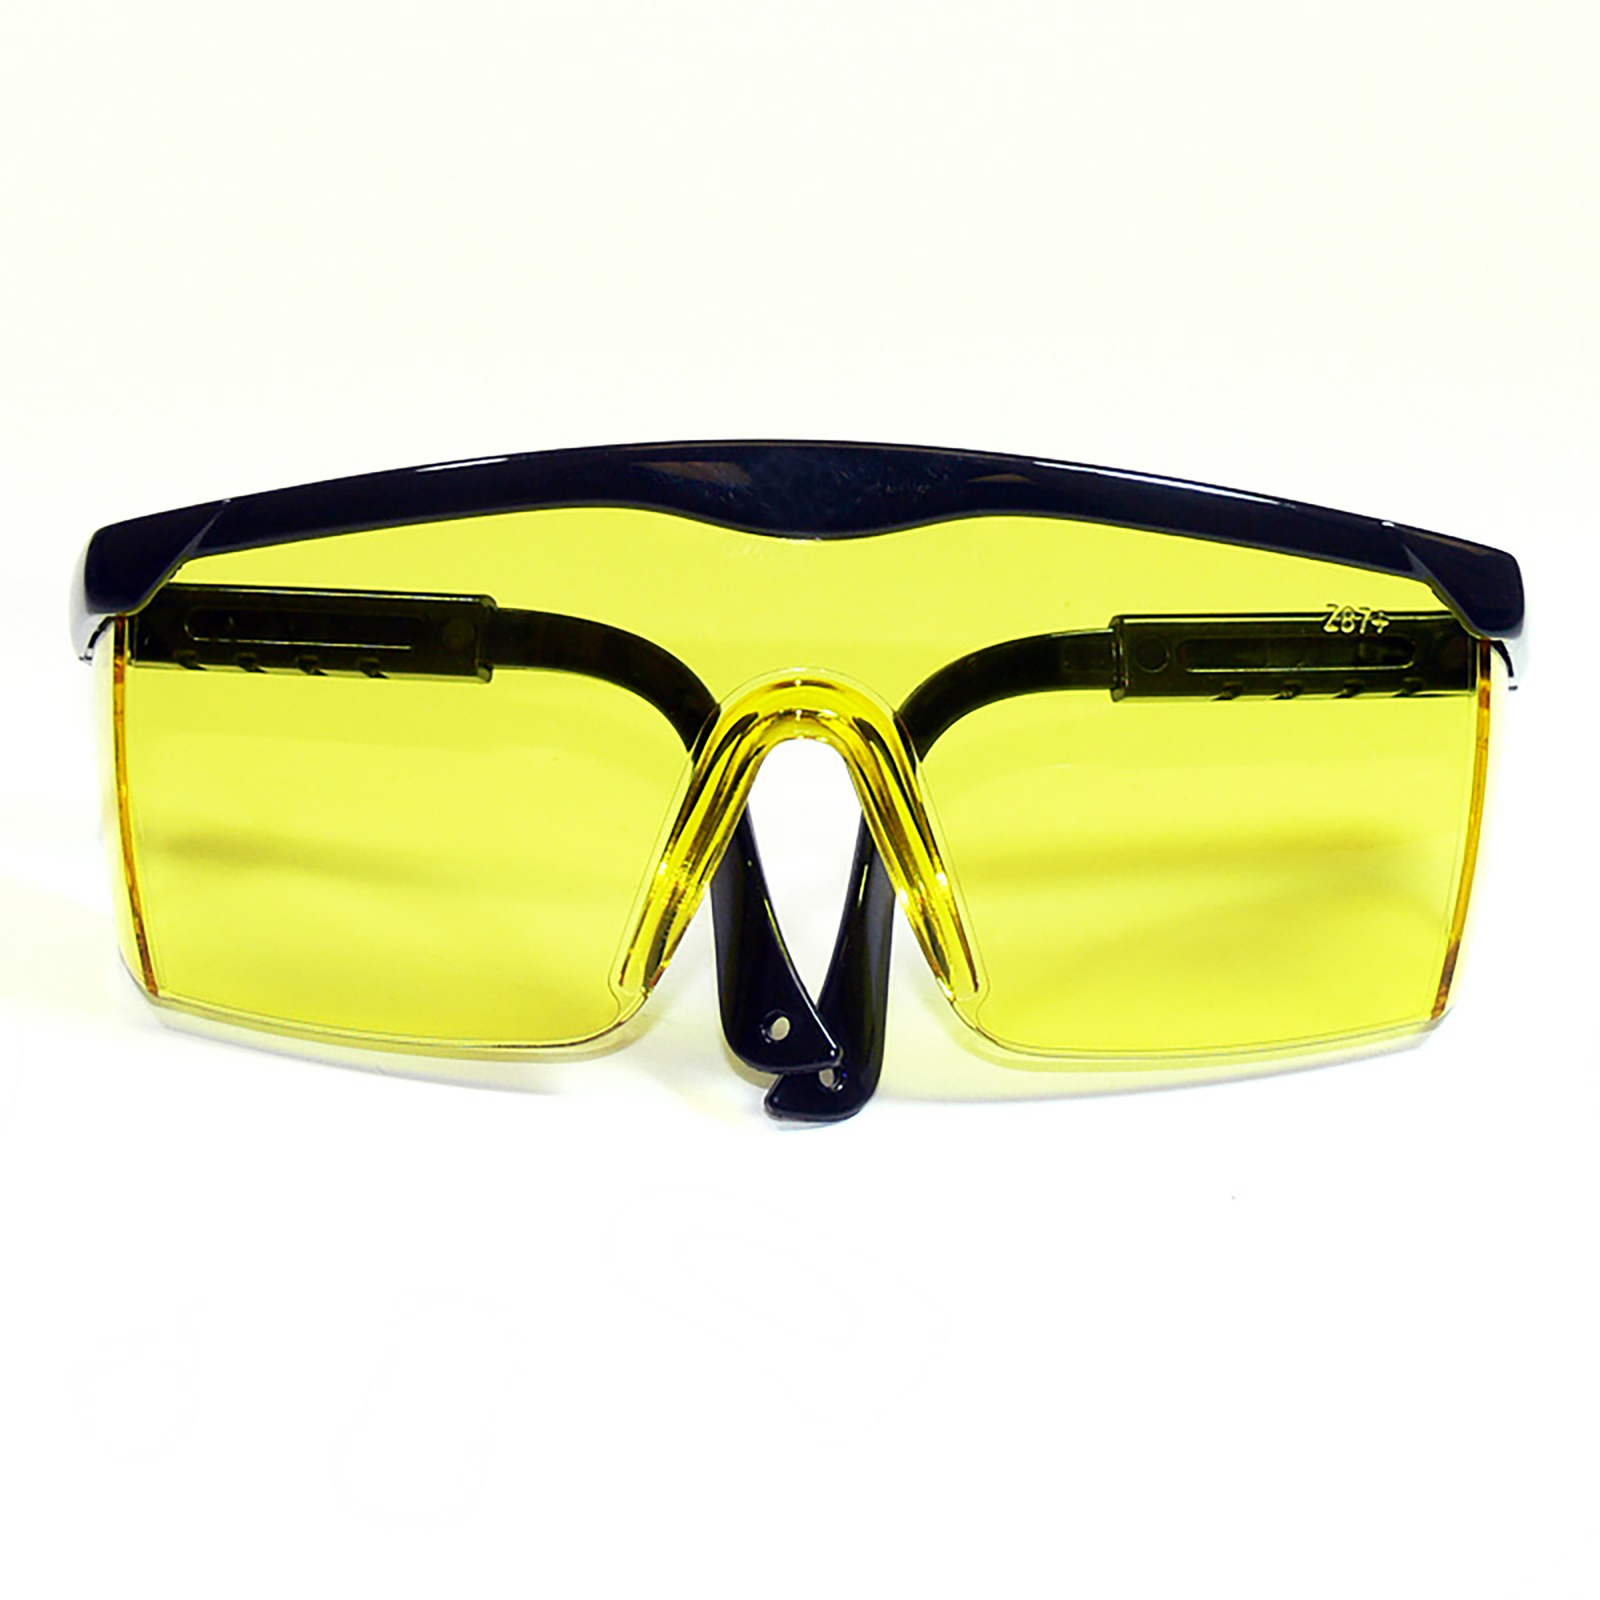 frontal view of the black framed rectangular safety yellow glasses with side shields for high impact protection with adjustable temple legs